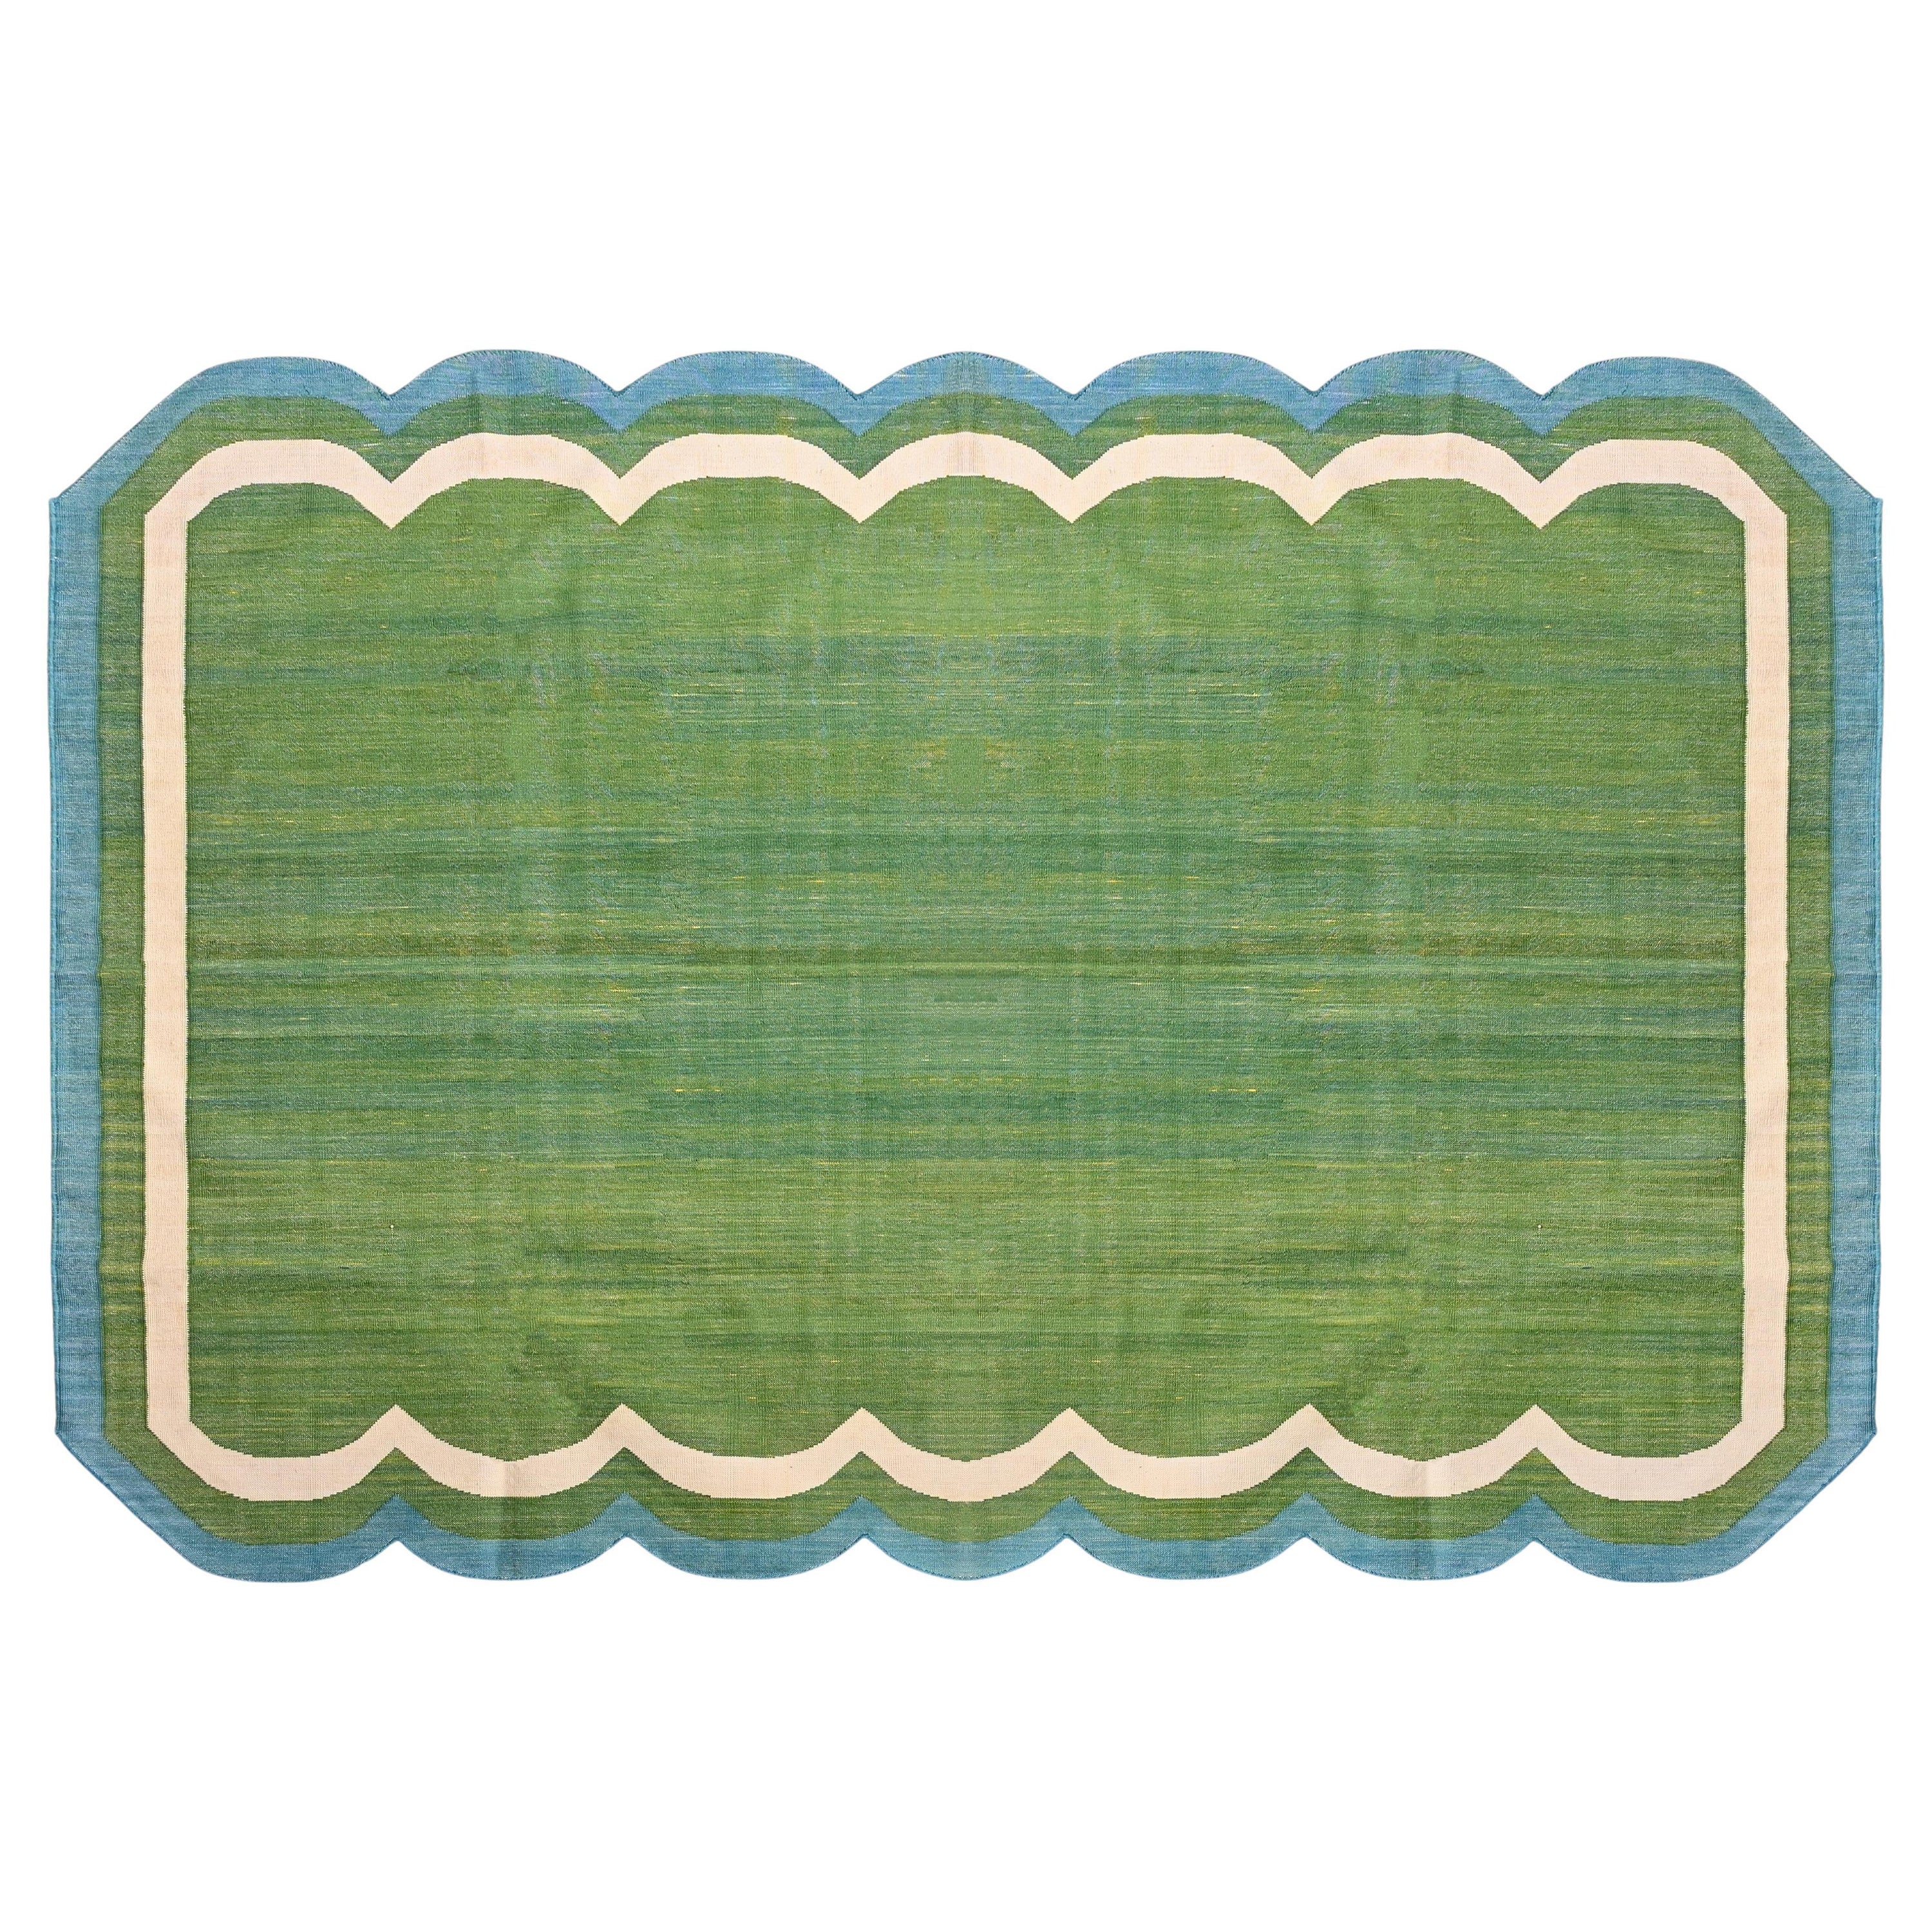 Handmade Cotton Area Flat Weave Rug, 5x7 Green And Blue Scalloped Kilim Dhurrie